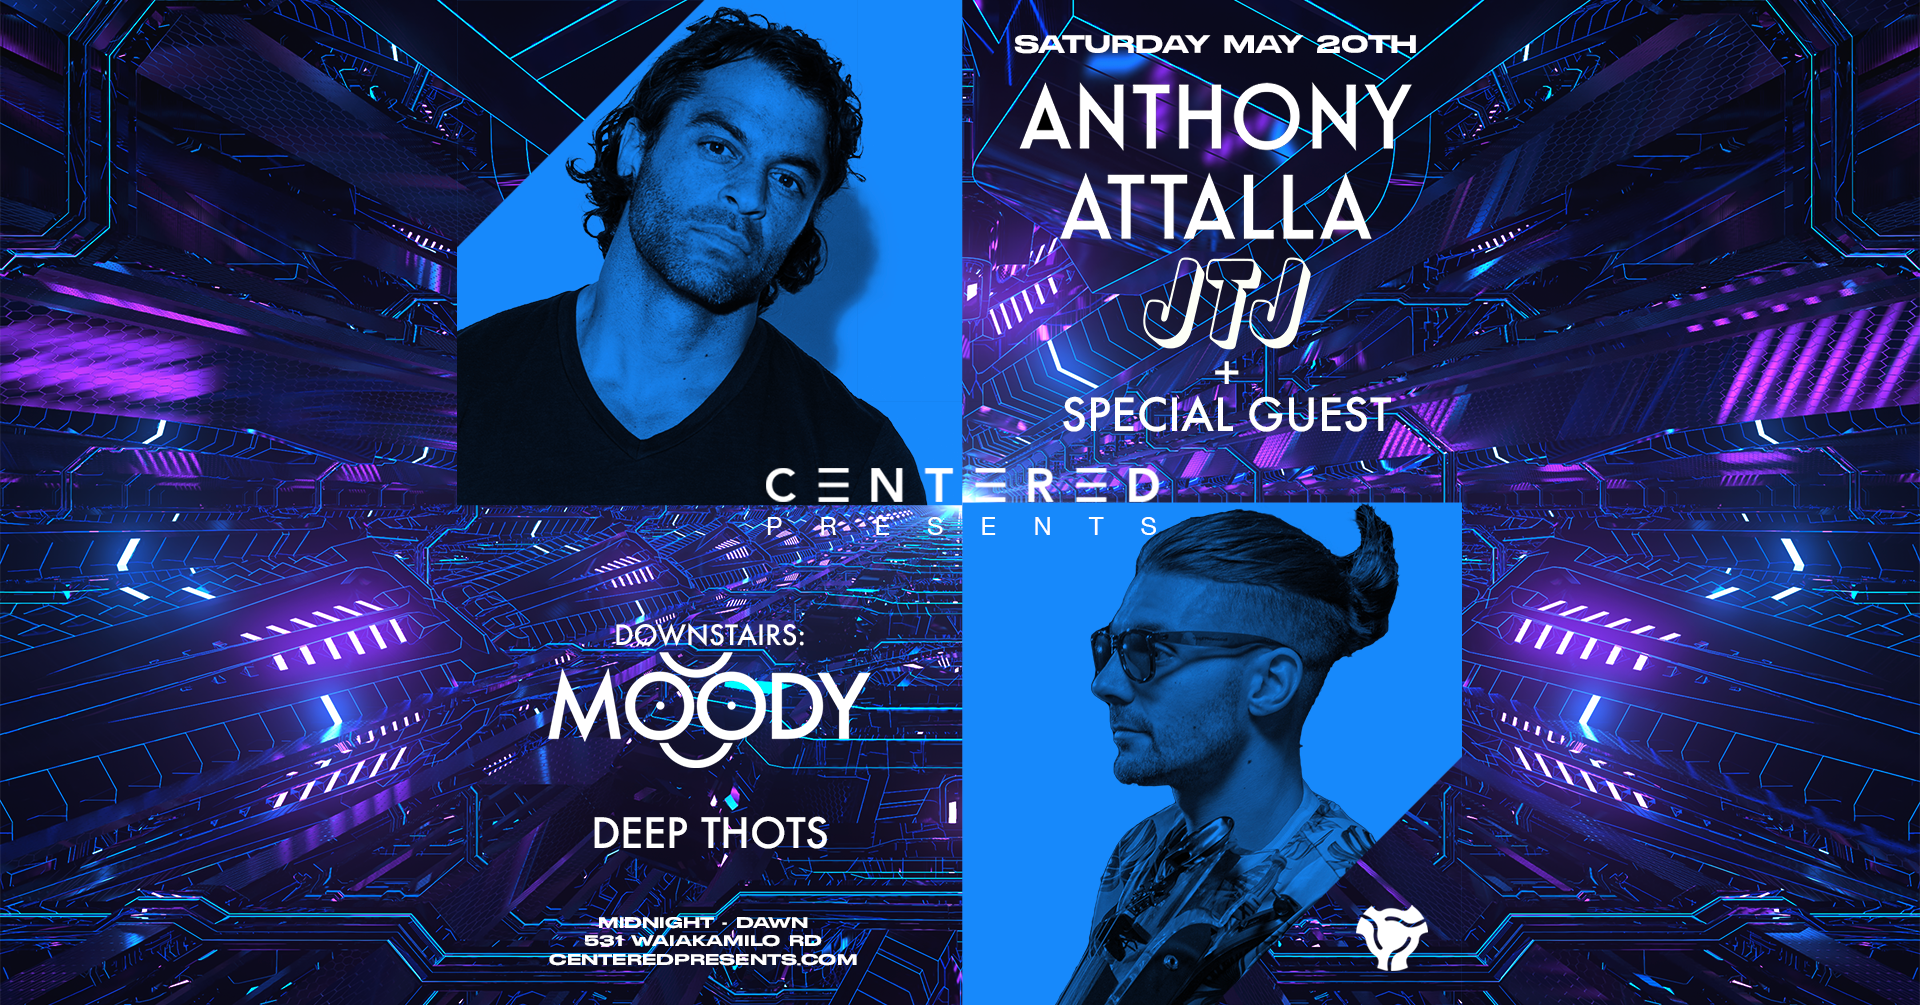 Centered presents, Anthony Attalla, JTJ, MOODY, DEEP THOTS + SPECIAL GUEST - フライヤー表